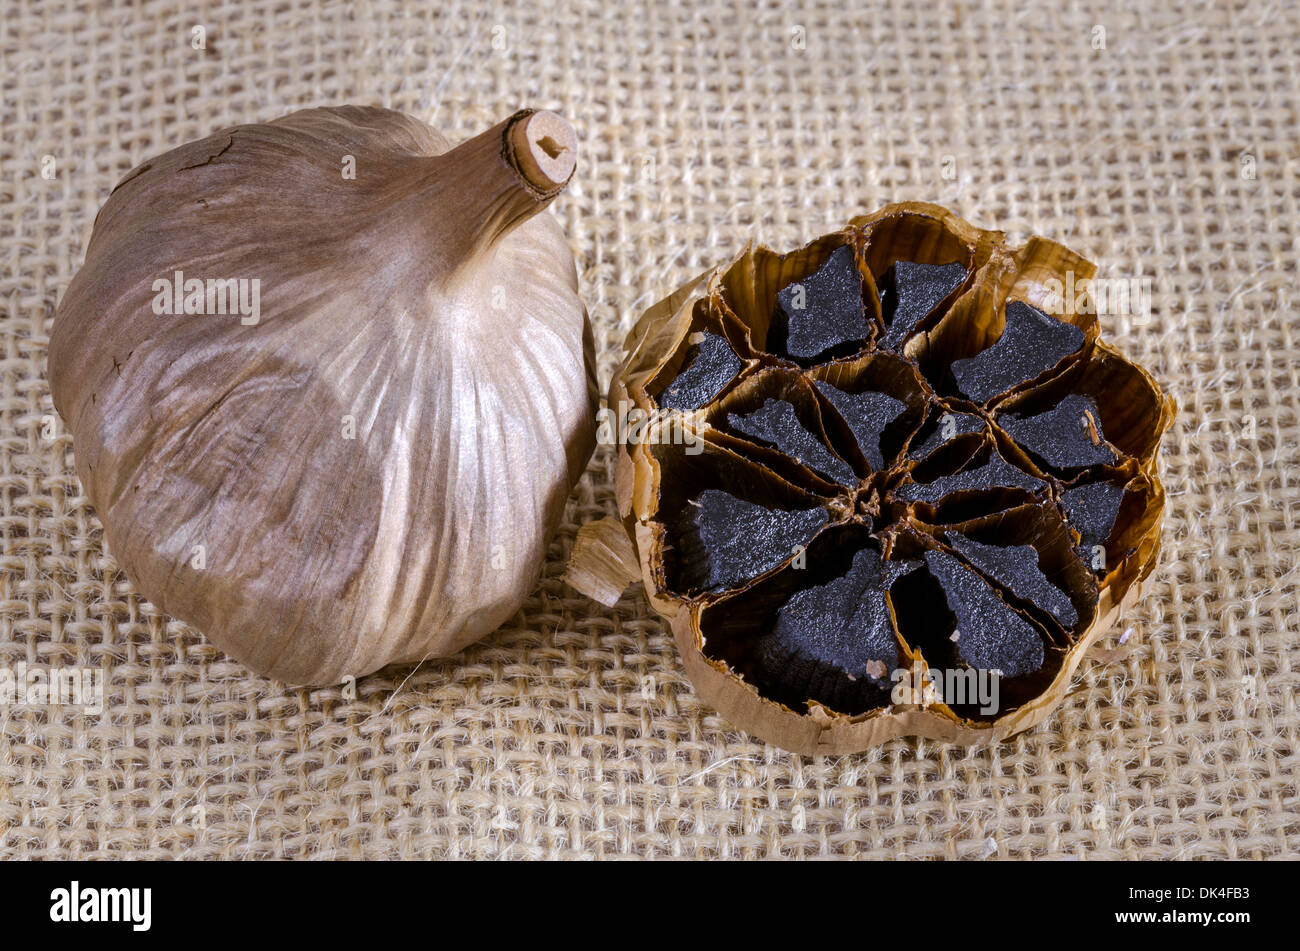 Black garlic bulb with cross section showing black cloves Stock Photo